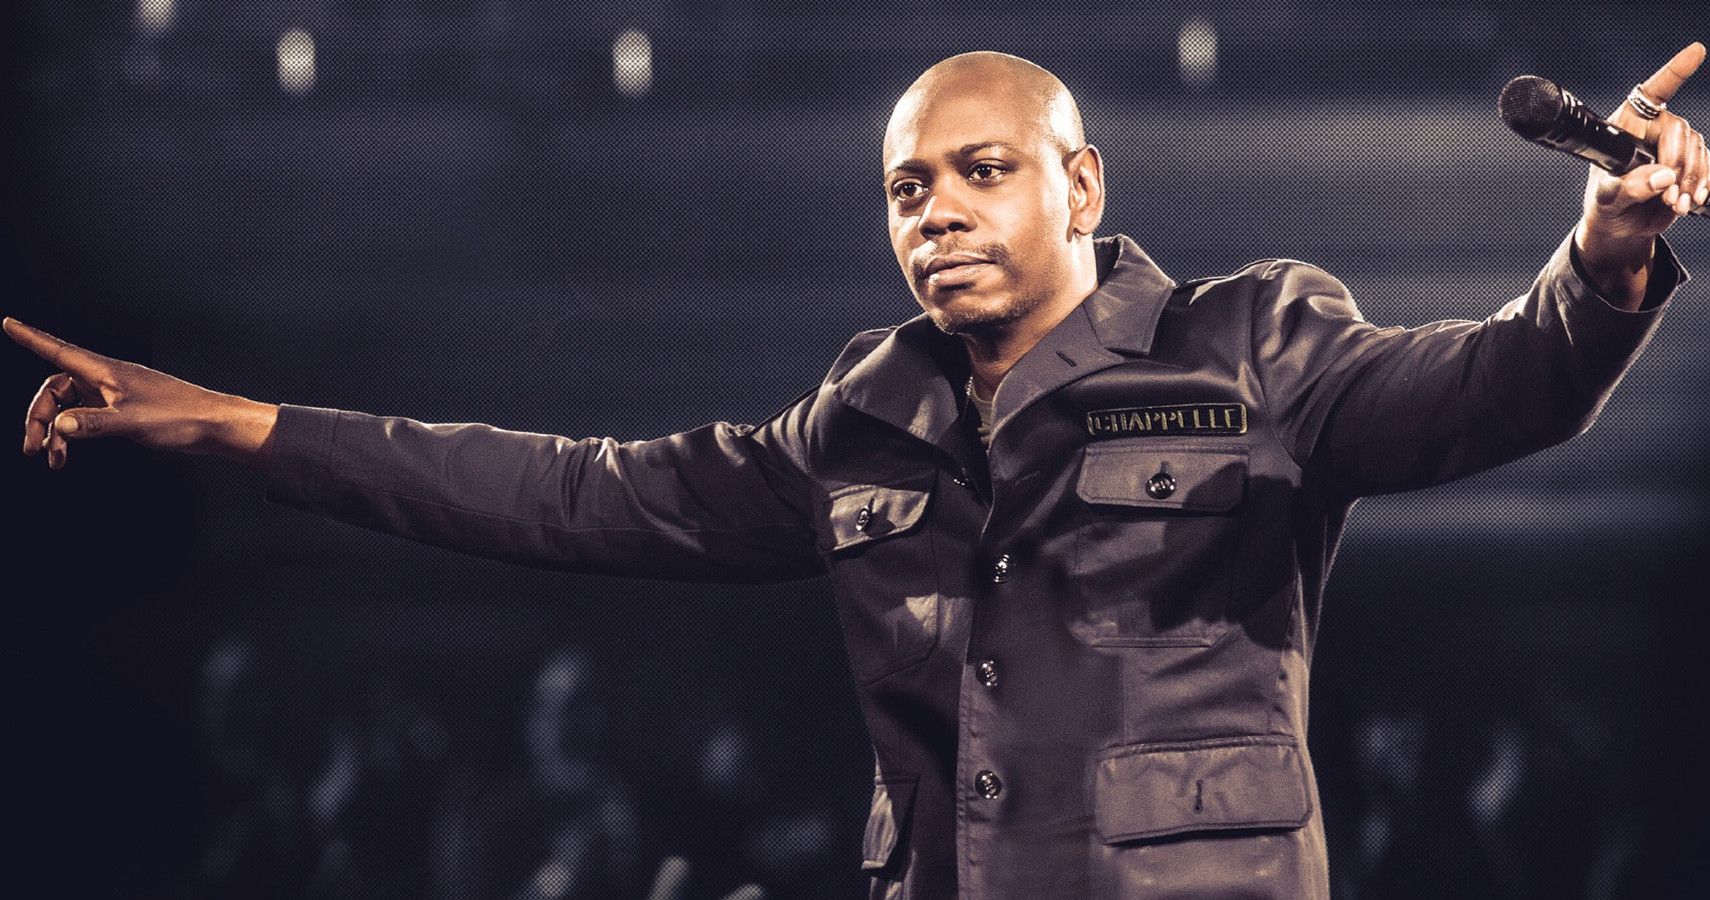 Dave Chappelle in front of a crowd